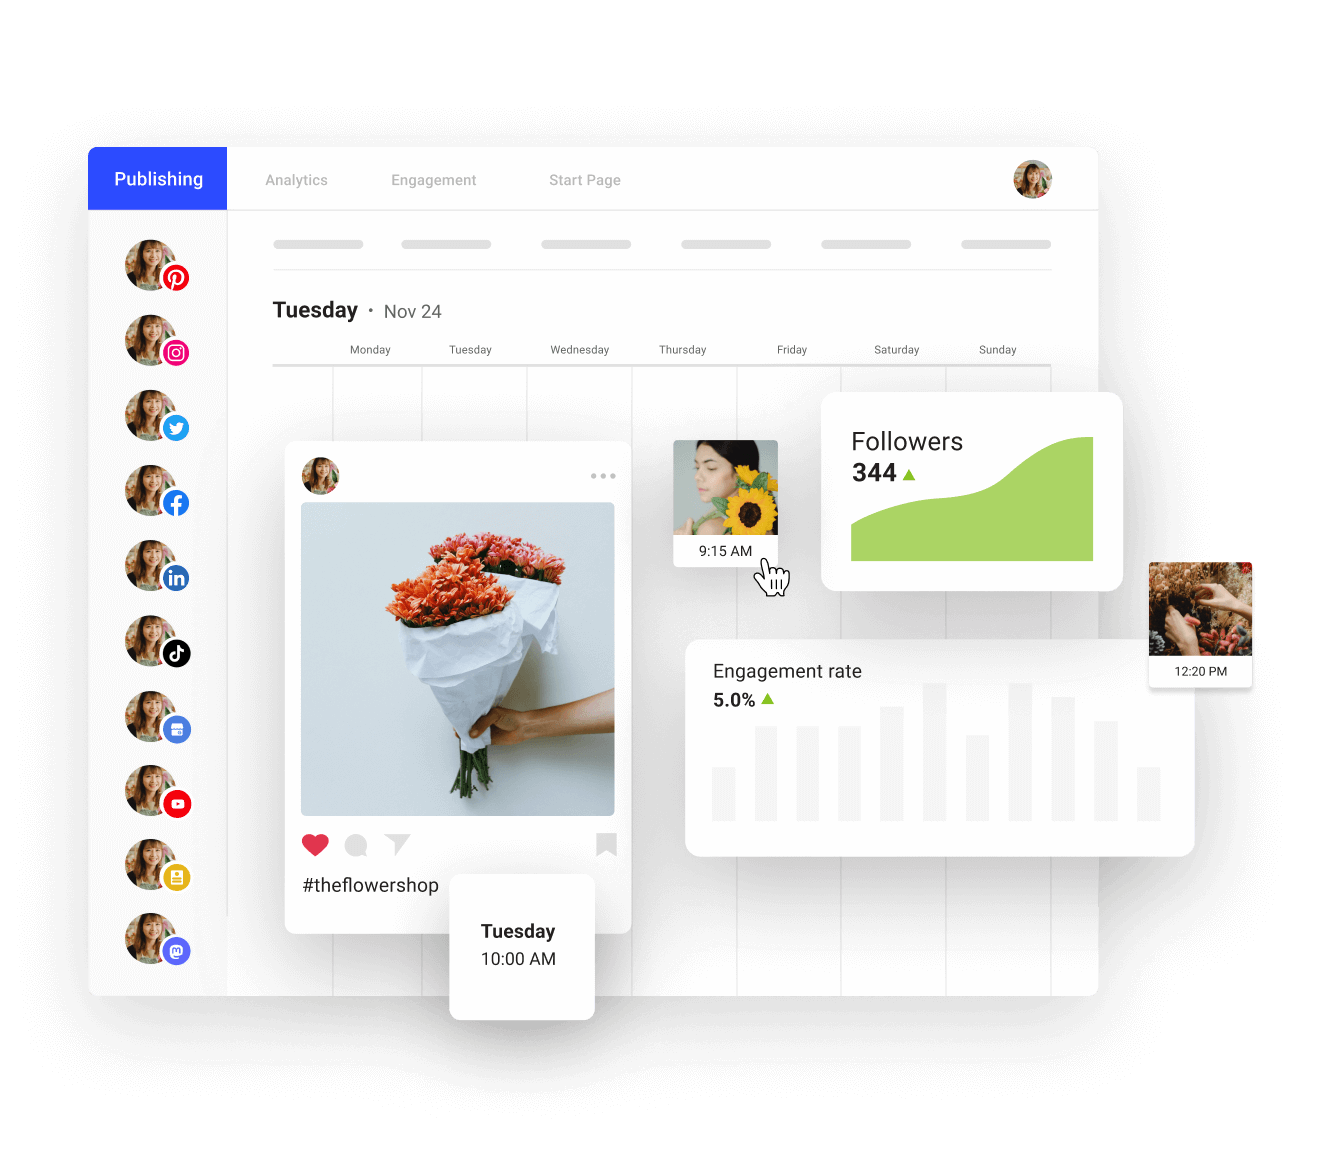 Plan and publish your content for Instagram, TikTok, Facebook, Twitter, Pinterest, and LinkedIn, all from one simple dashboard.